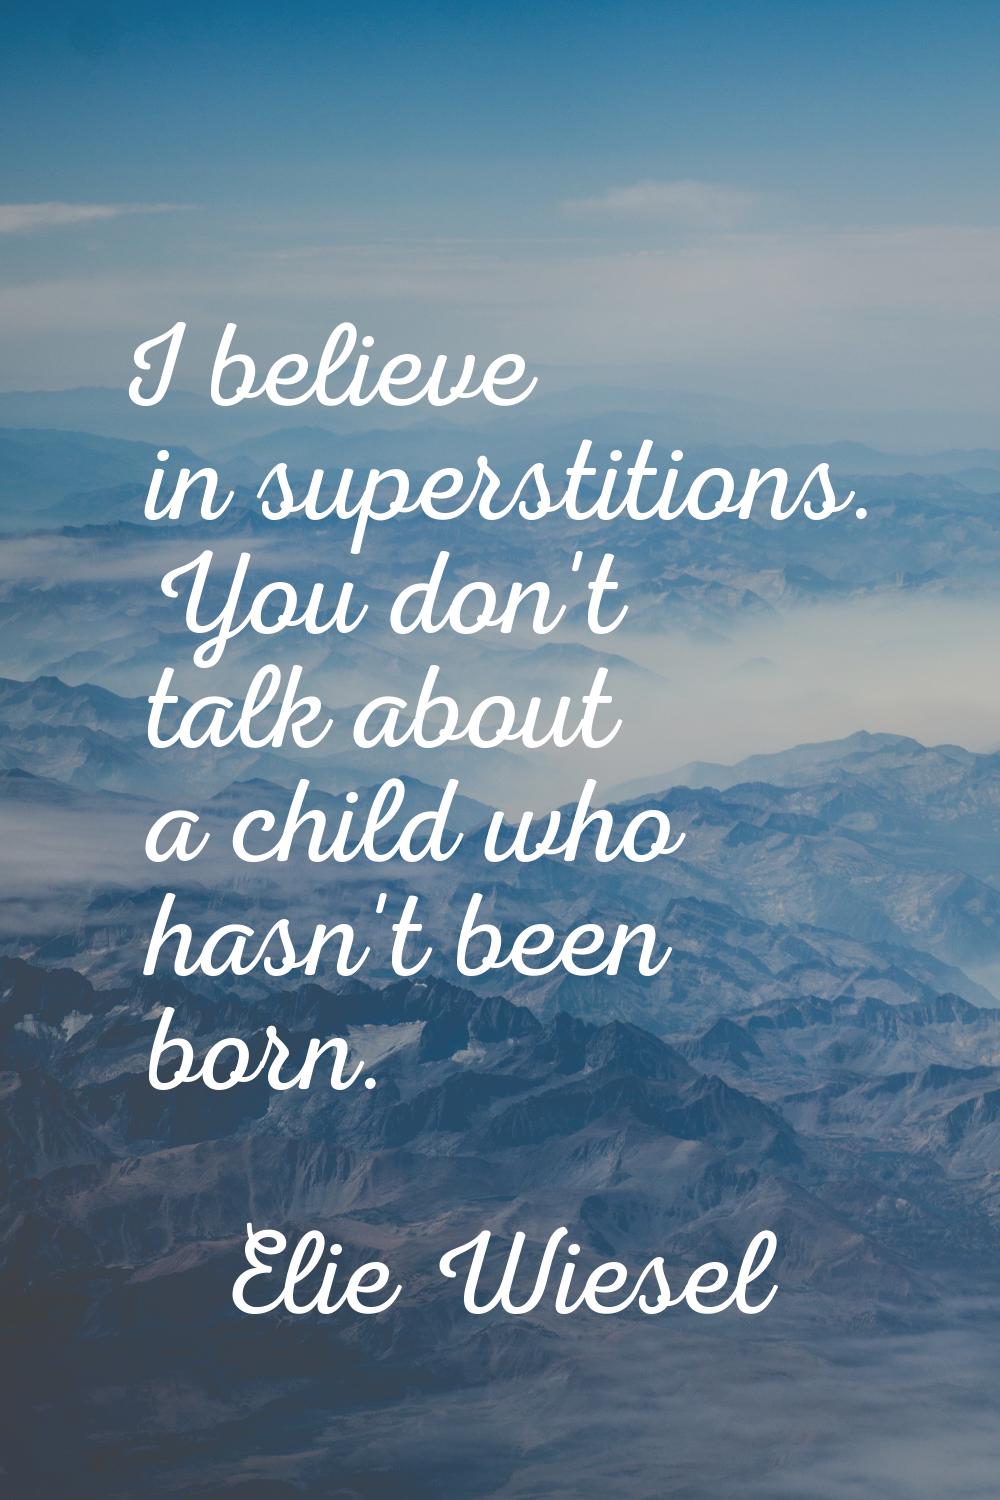 I believe in superstitions. You don't talk about a child who hasn't been born.